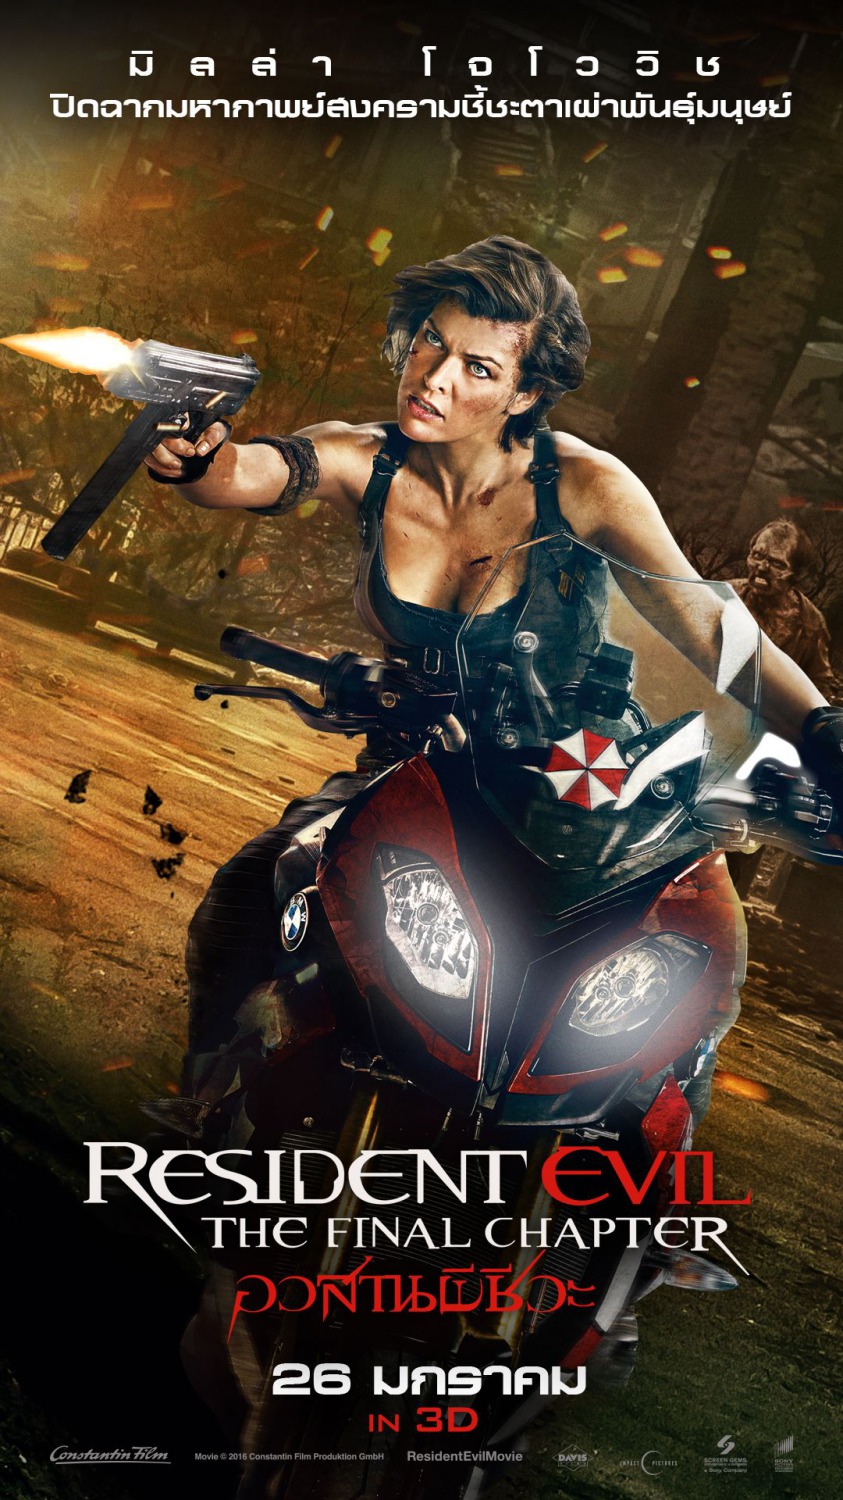 Resident Evil: The Final Chapter (2016) - Video Gallery - IMDb